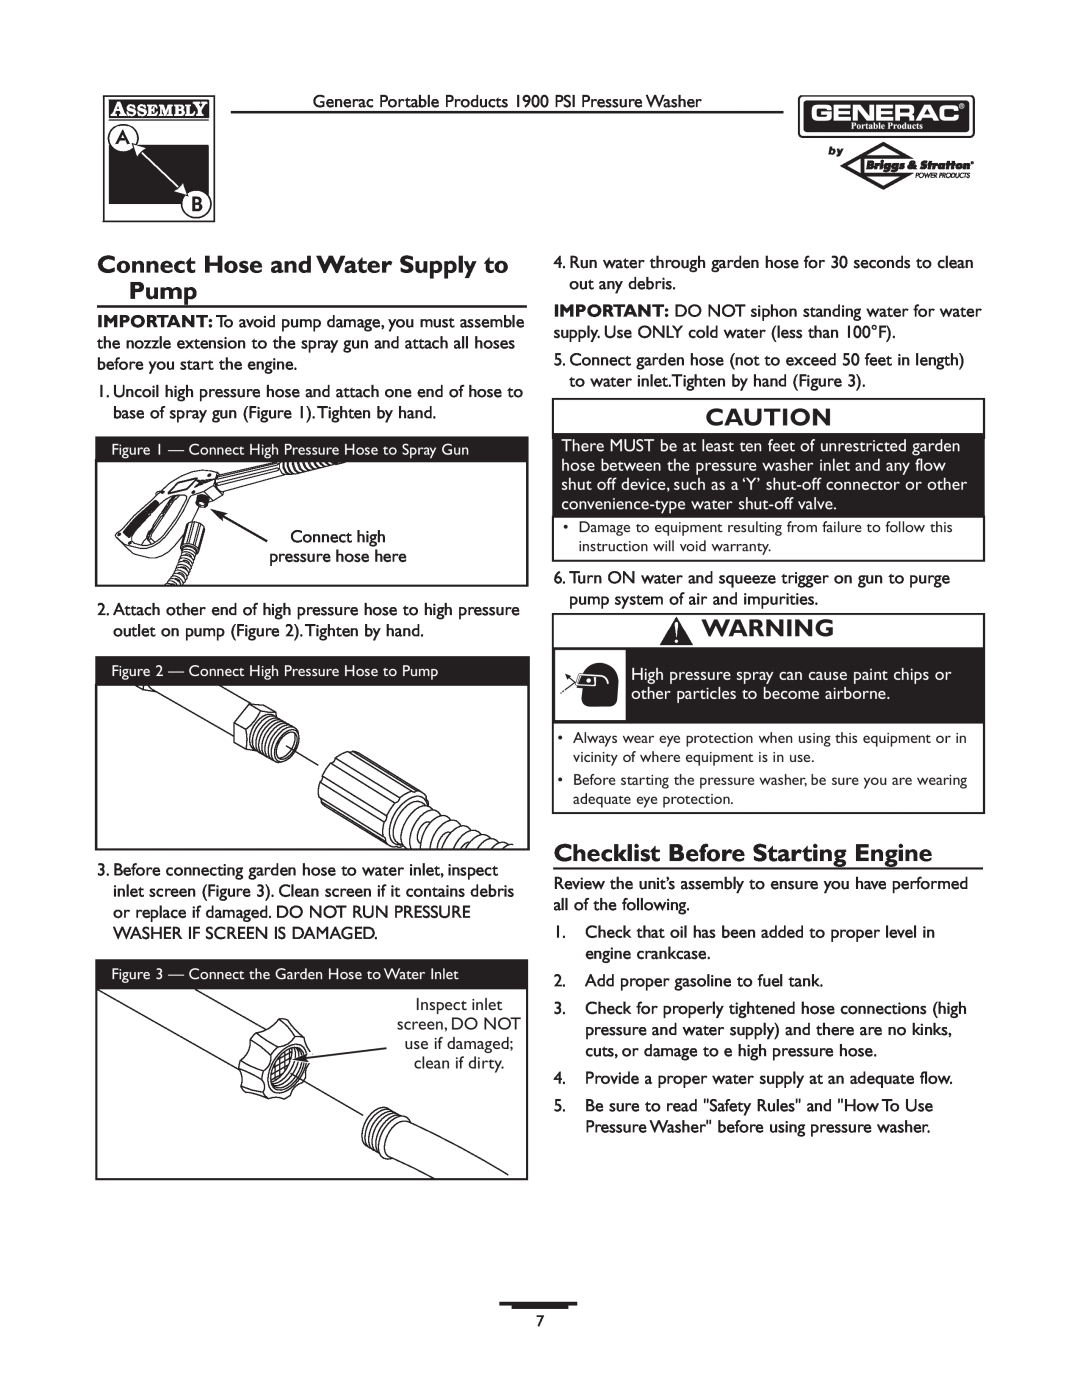 Briggs & Stratton 1900PSI owner manual Connect Hose and Water Supply to Pump, Checklist Before Starting Engine 